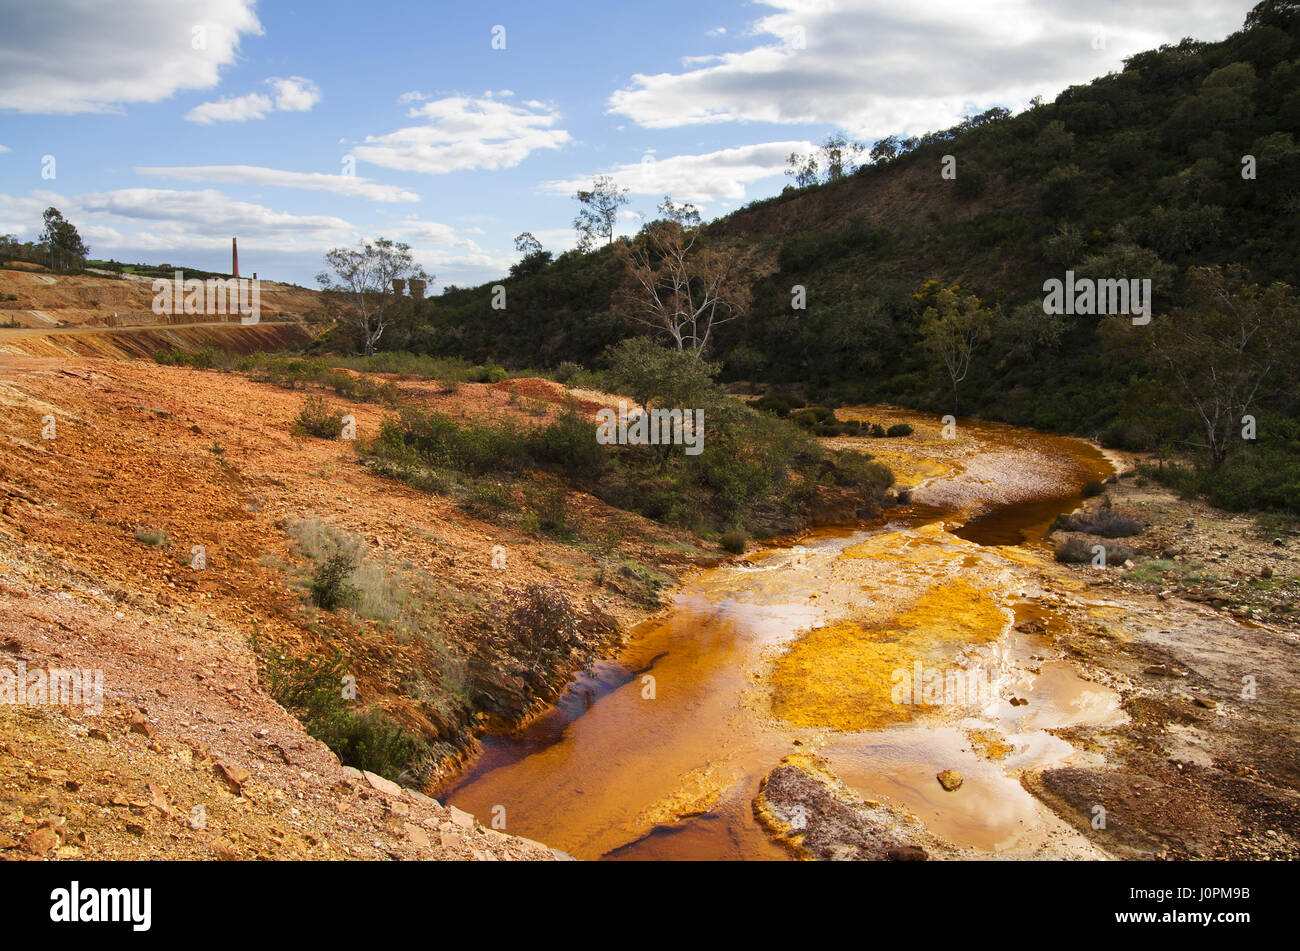 Yellow and red sulfur and iron polluted river bend at Sao Domingos abandoned mine under a blue clouded sky. Mertola, Alentejo, Portugal. Stock Photo